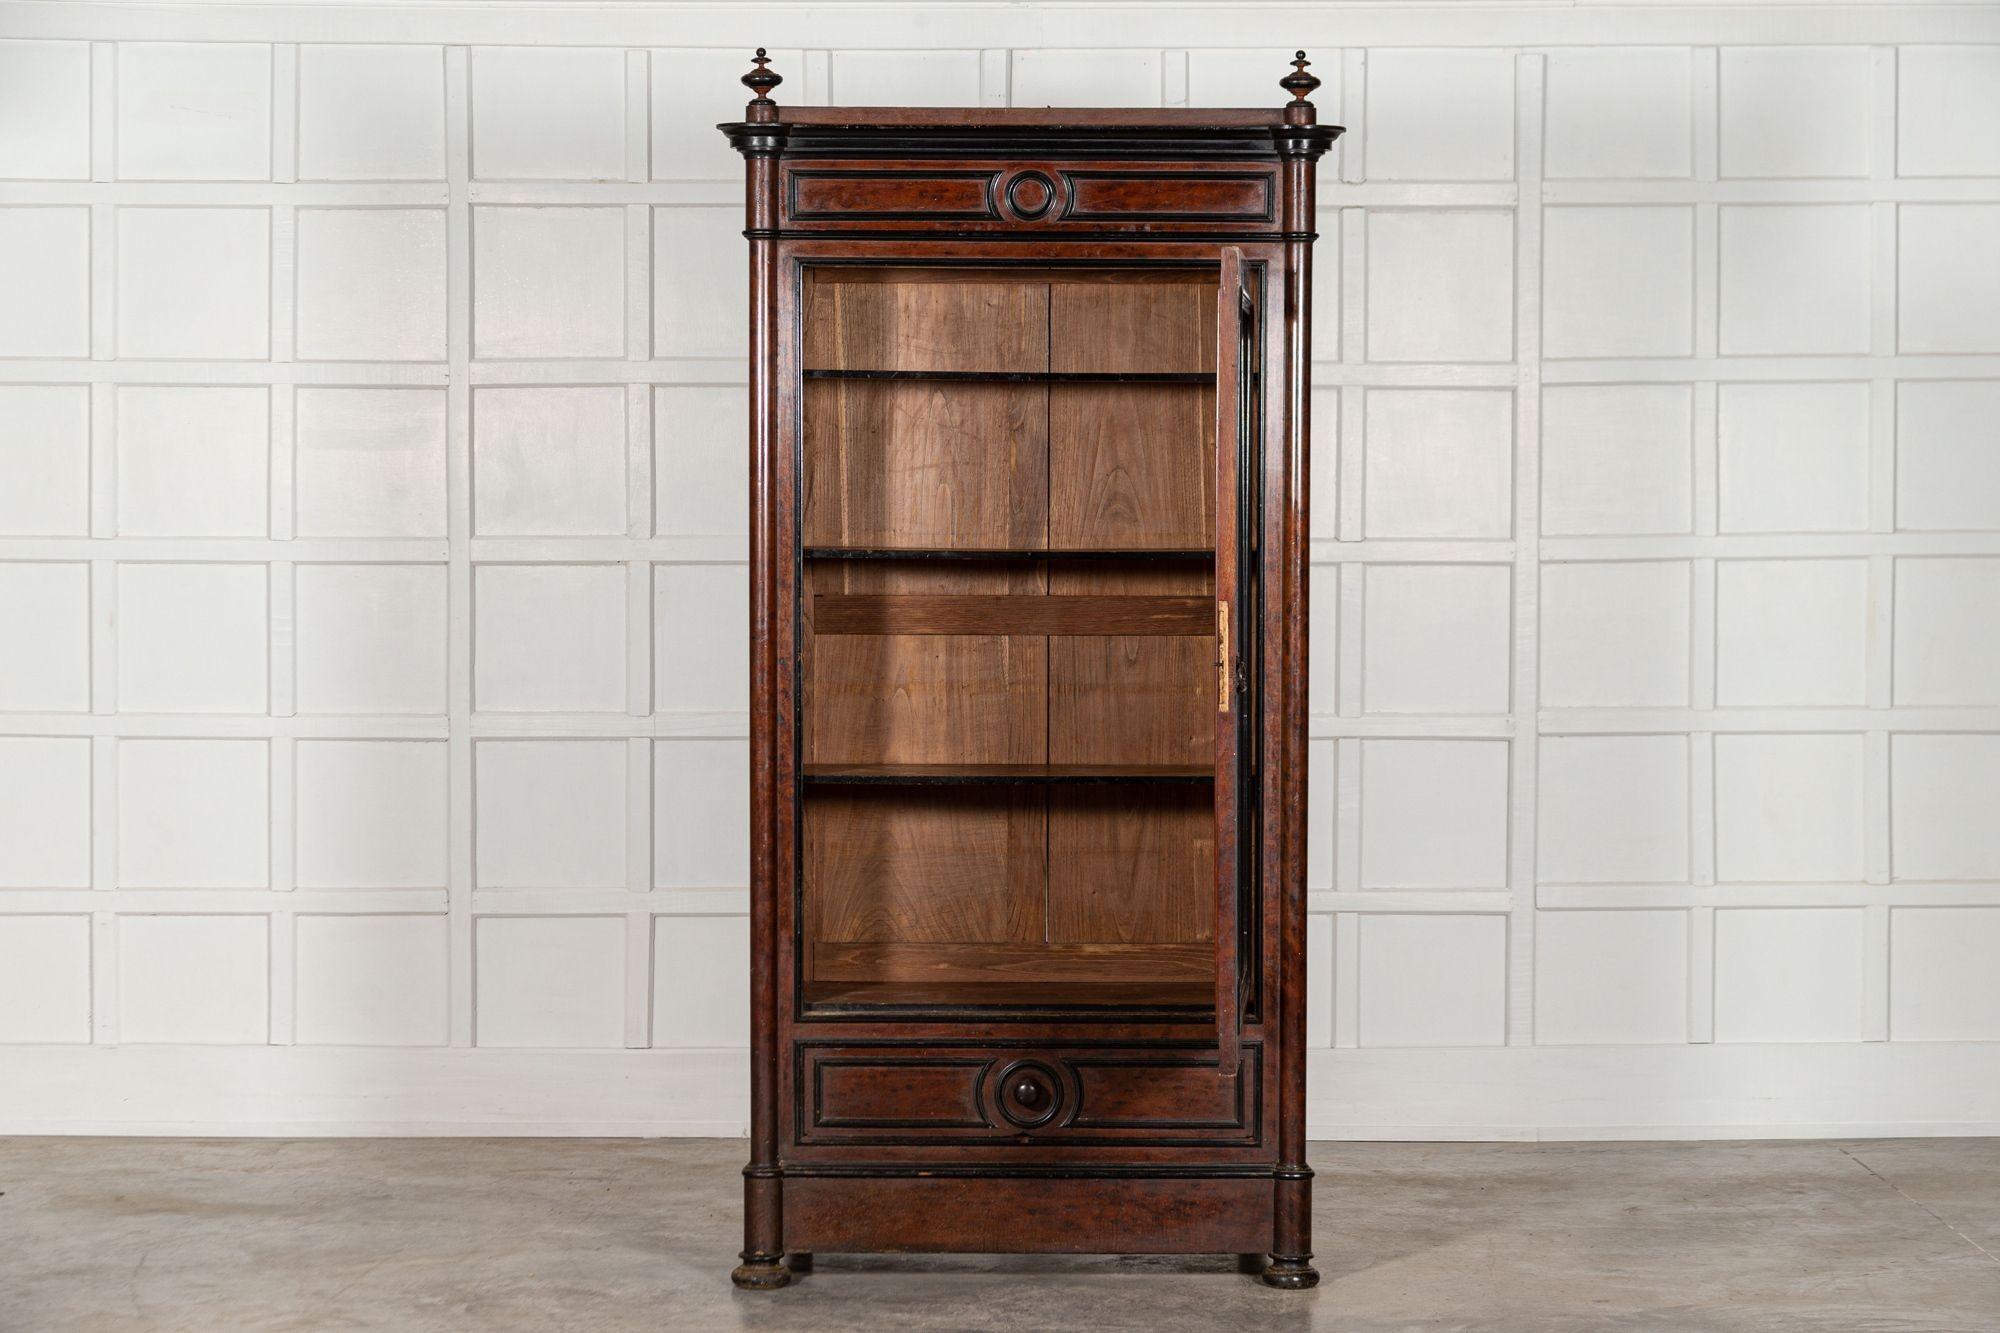 circa 1870
19th century ebonised walnut french mirrored armoire
Sourced from the South of France
sku 1431B
Measures: W115 x D49 x H227cm.